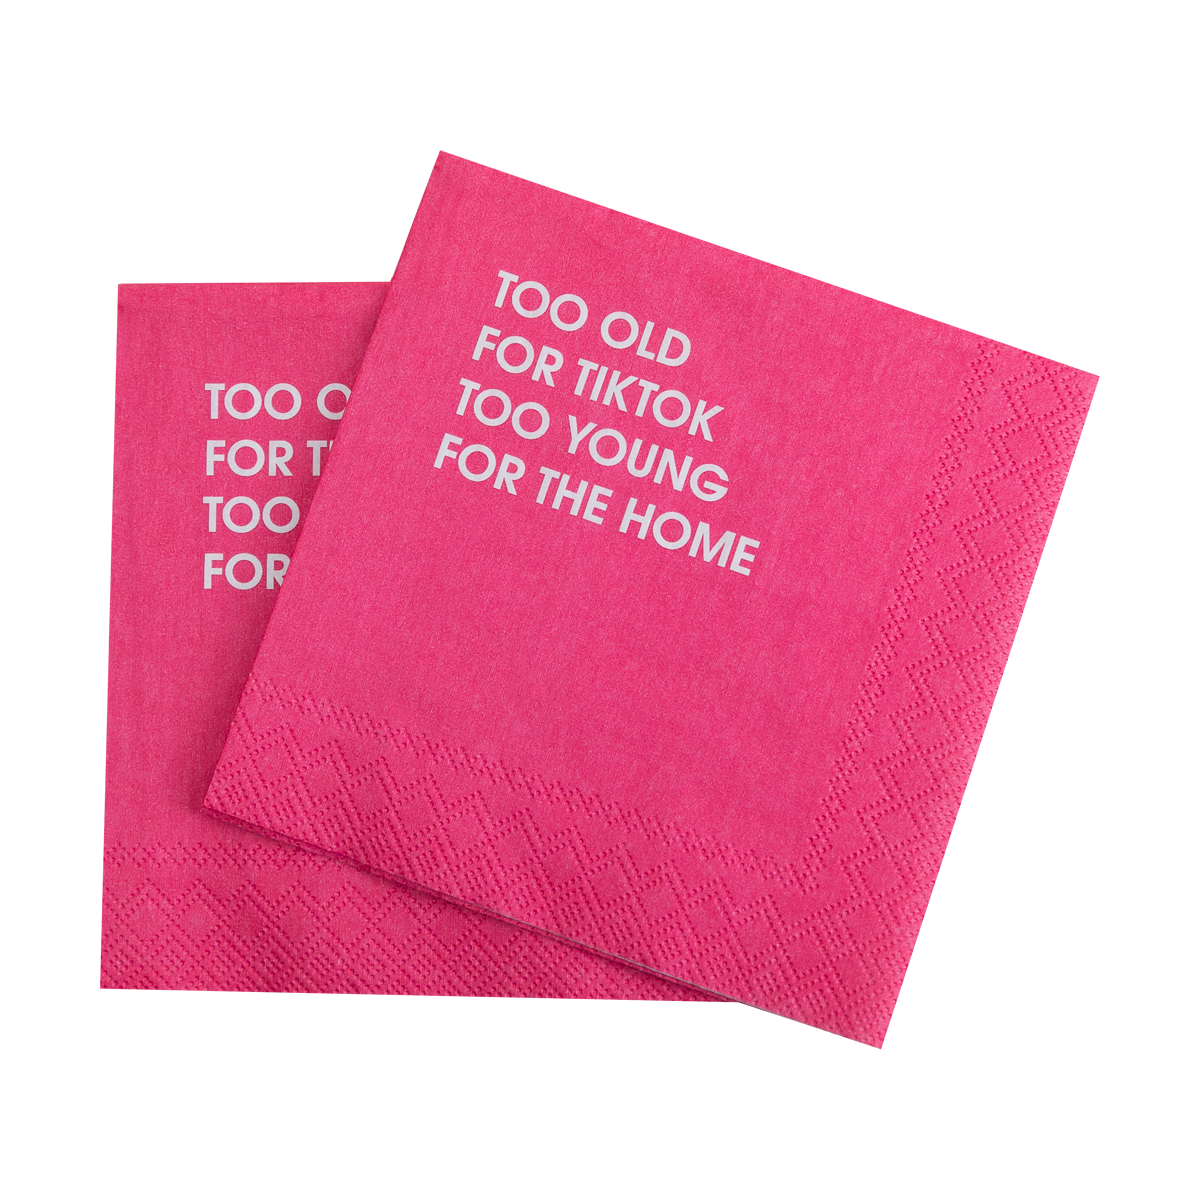 Too Old For Tiktok, Too Young For The Home  - Cocktail Napkins